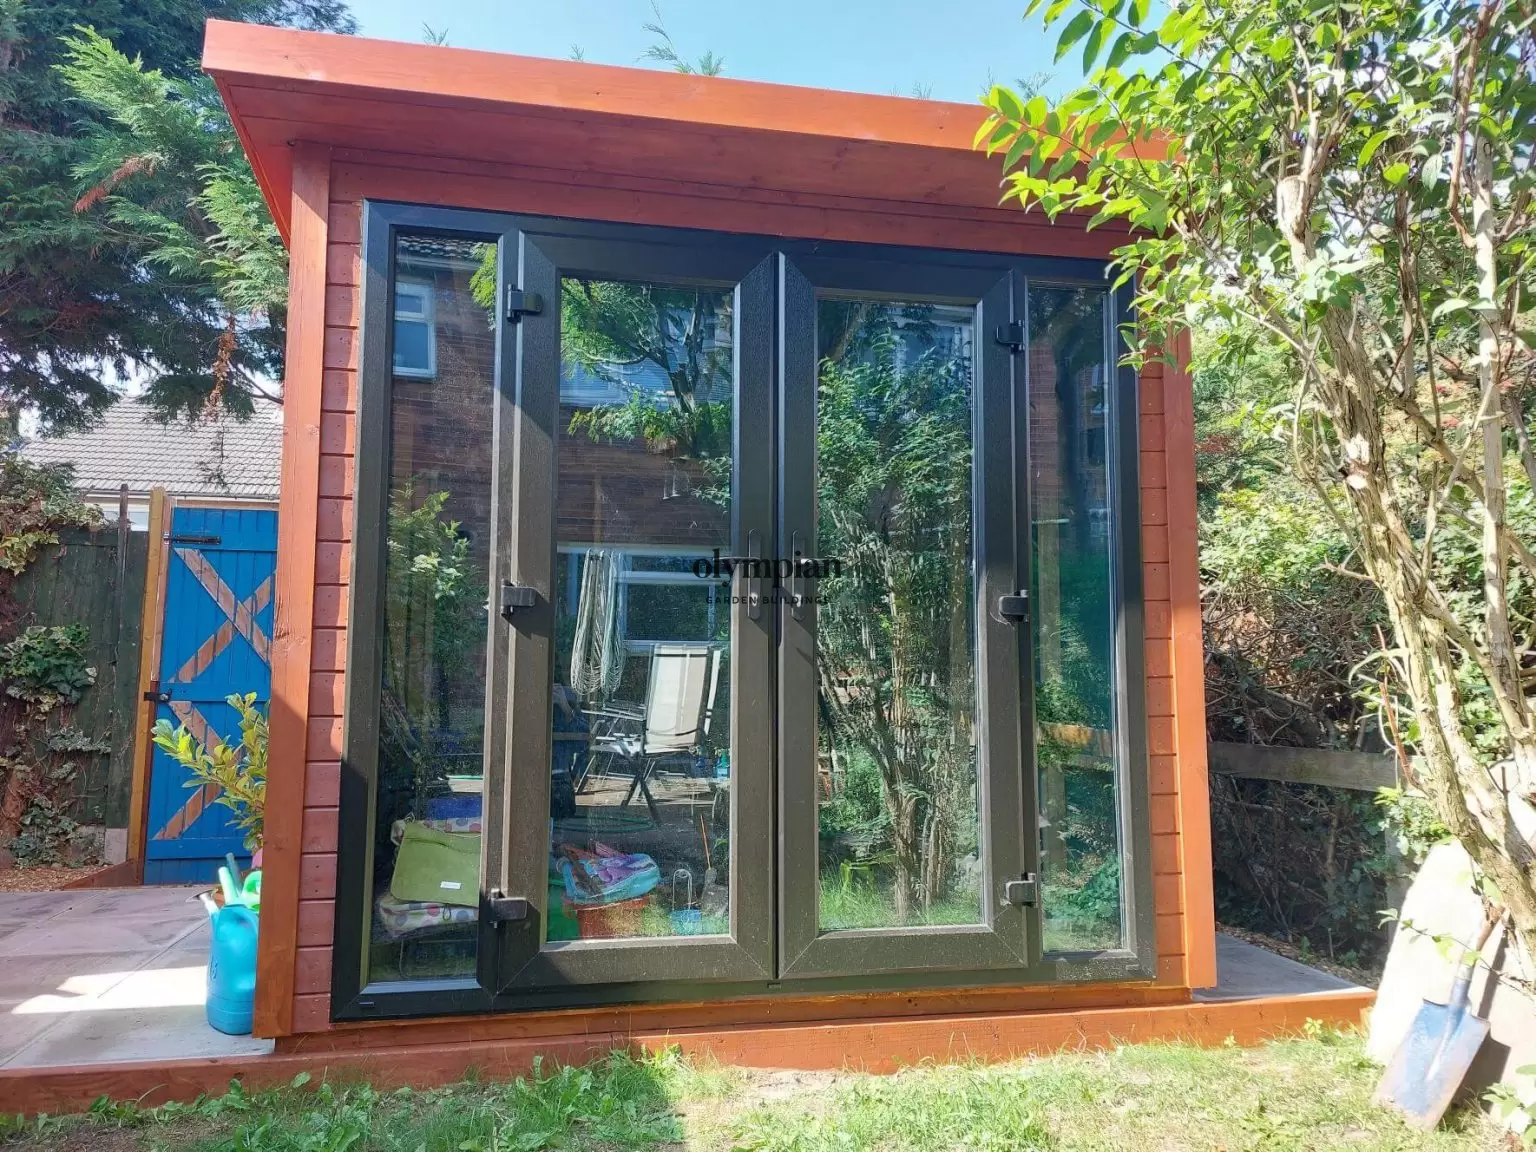 An 8ft x 8ft garden building with single-sloping roof and UPVC doors in the corner of a garden